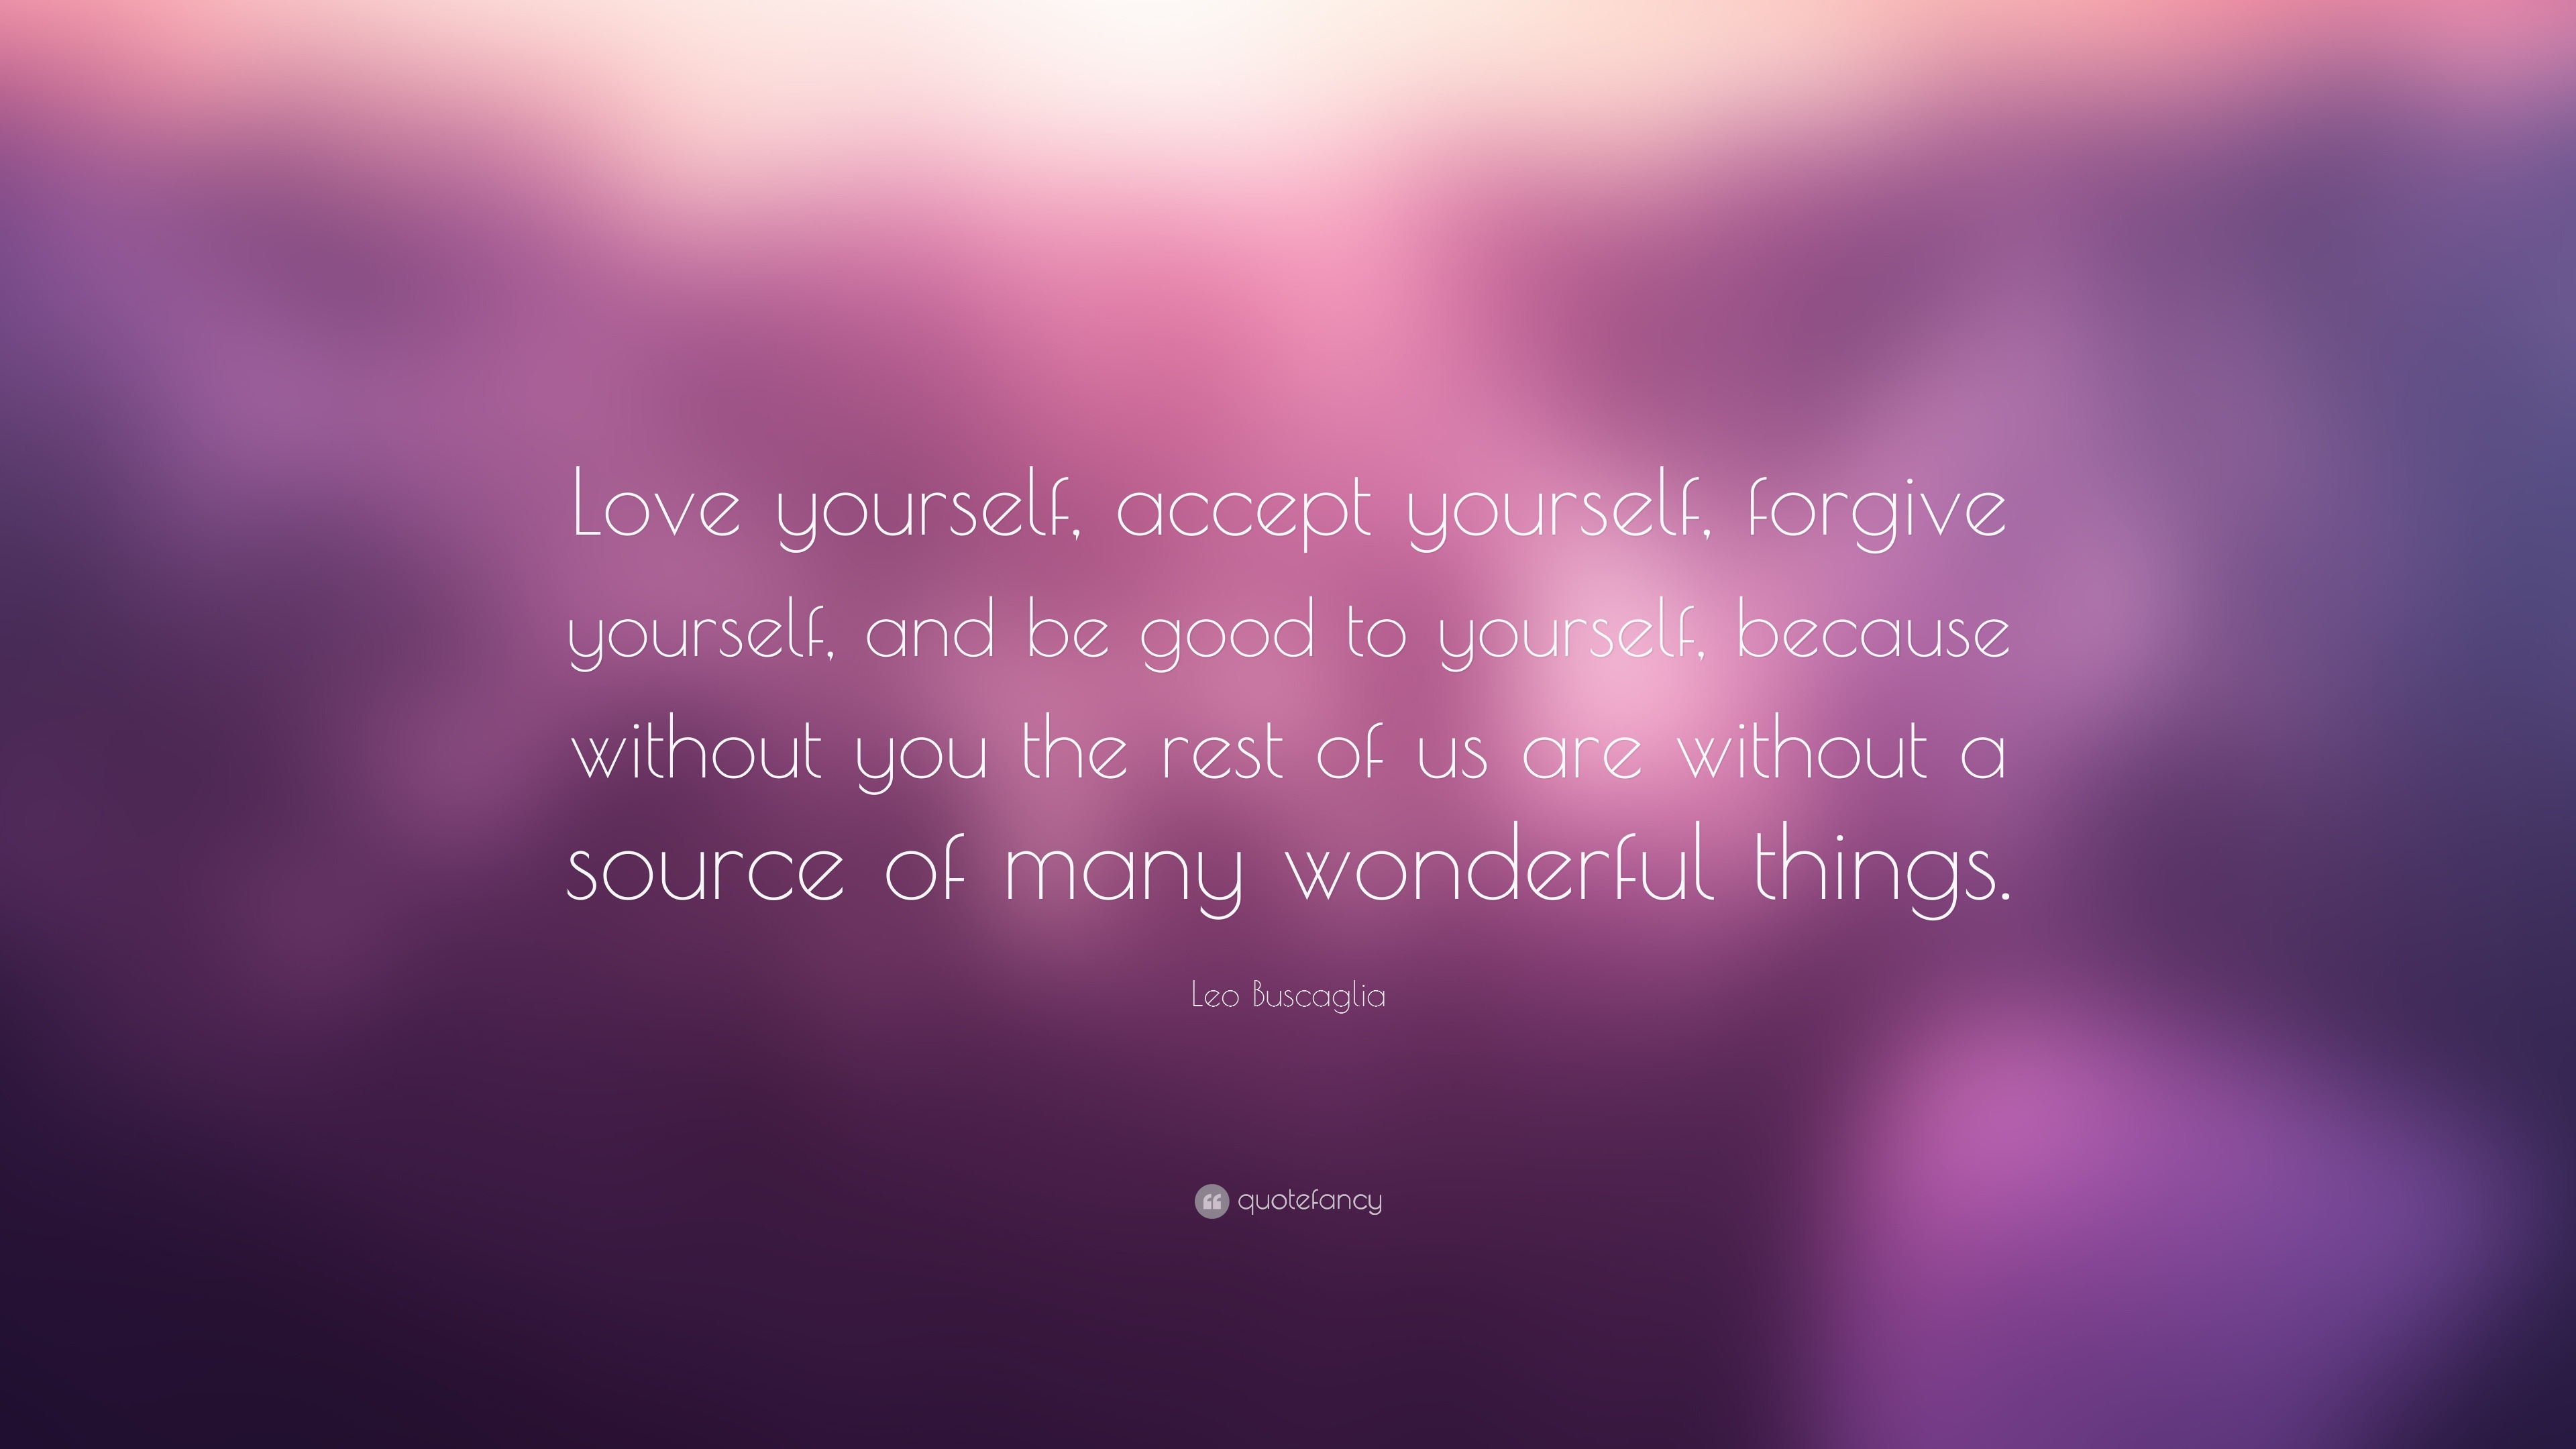 Leo Buscaglia Quote “Love yourself accept yourself forgive yourself and be